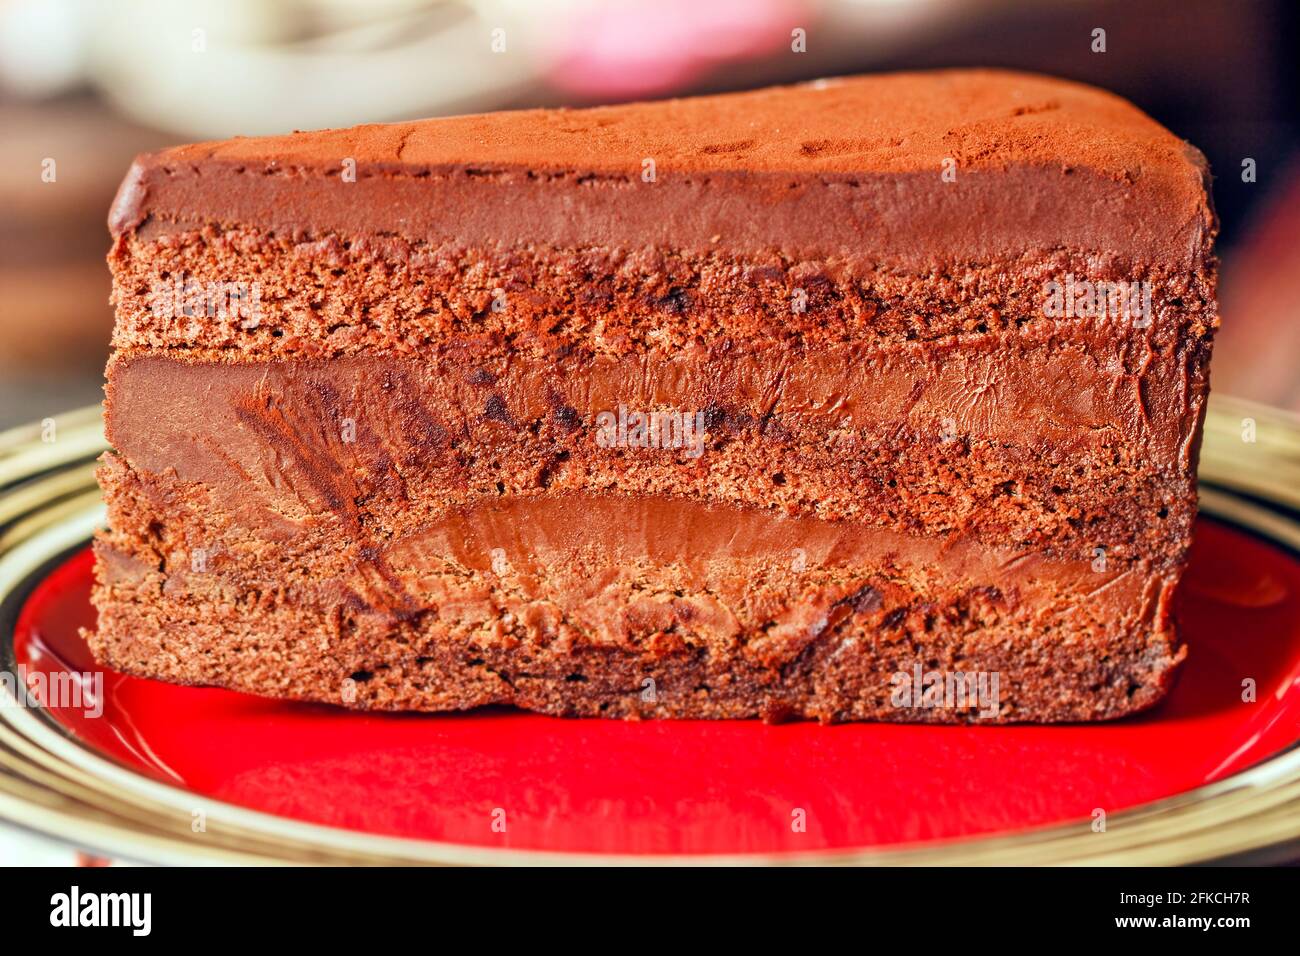 Real charming fresh tasty piece of chocolate cake for good mood Stock Photo